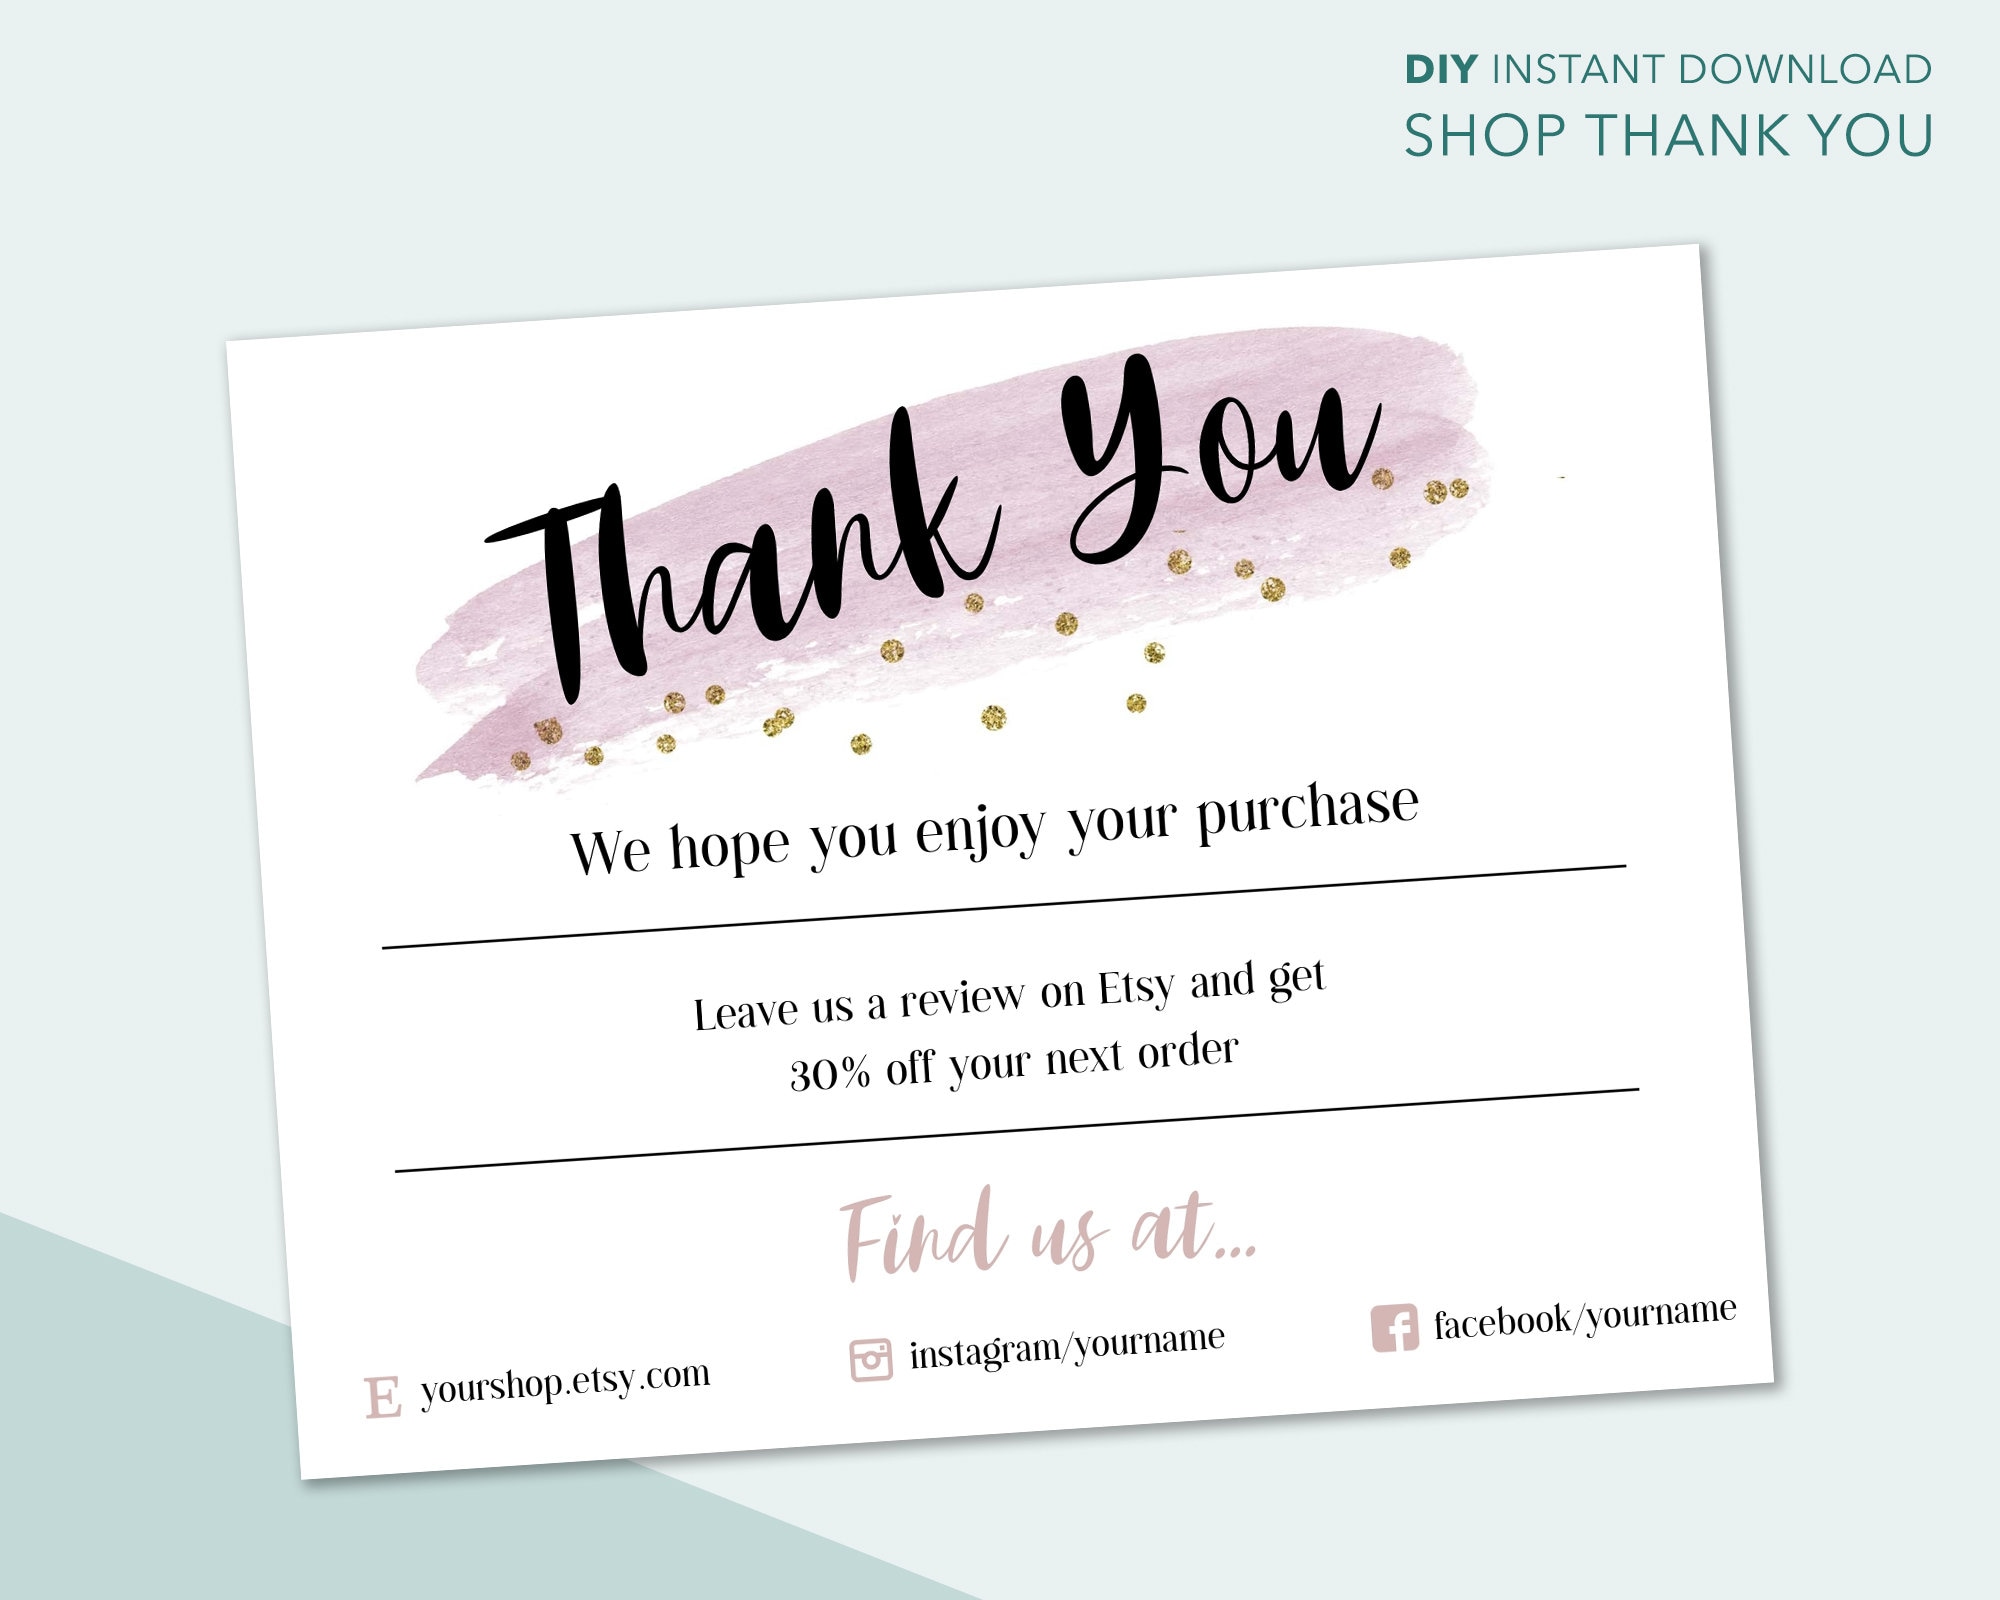 Business thank you for your purchase cards Editable | Etsy